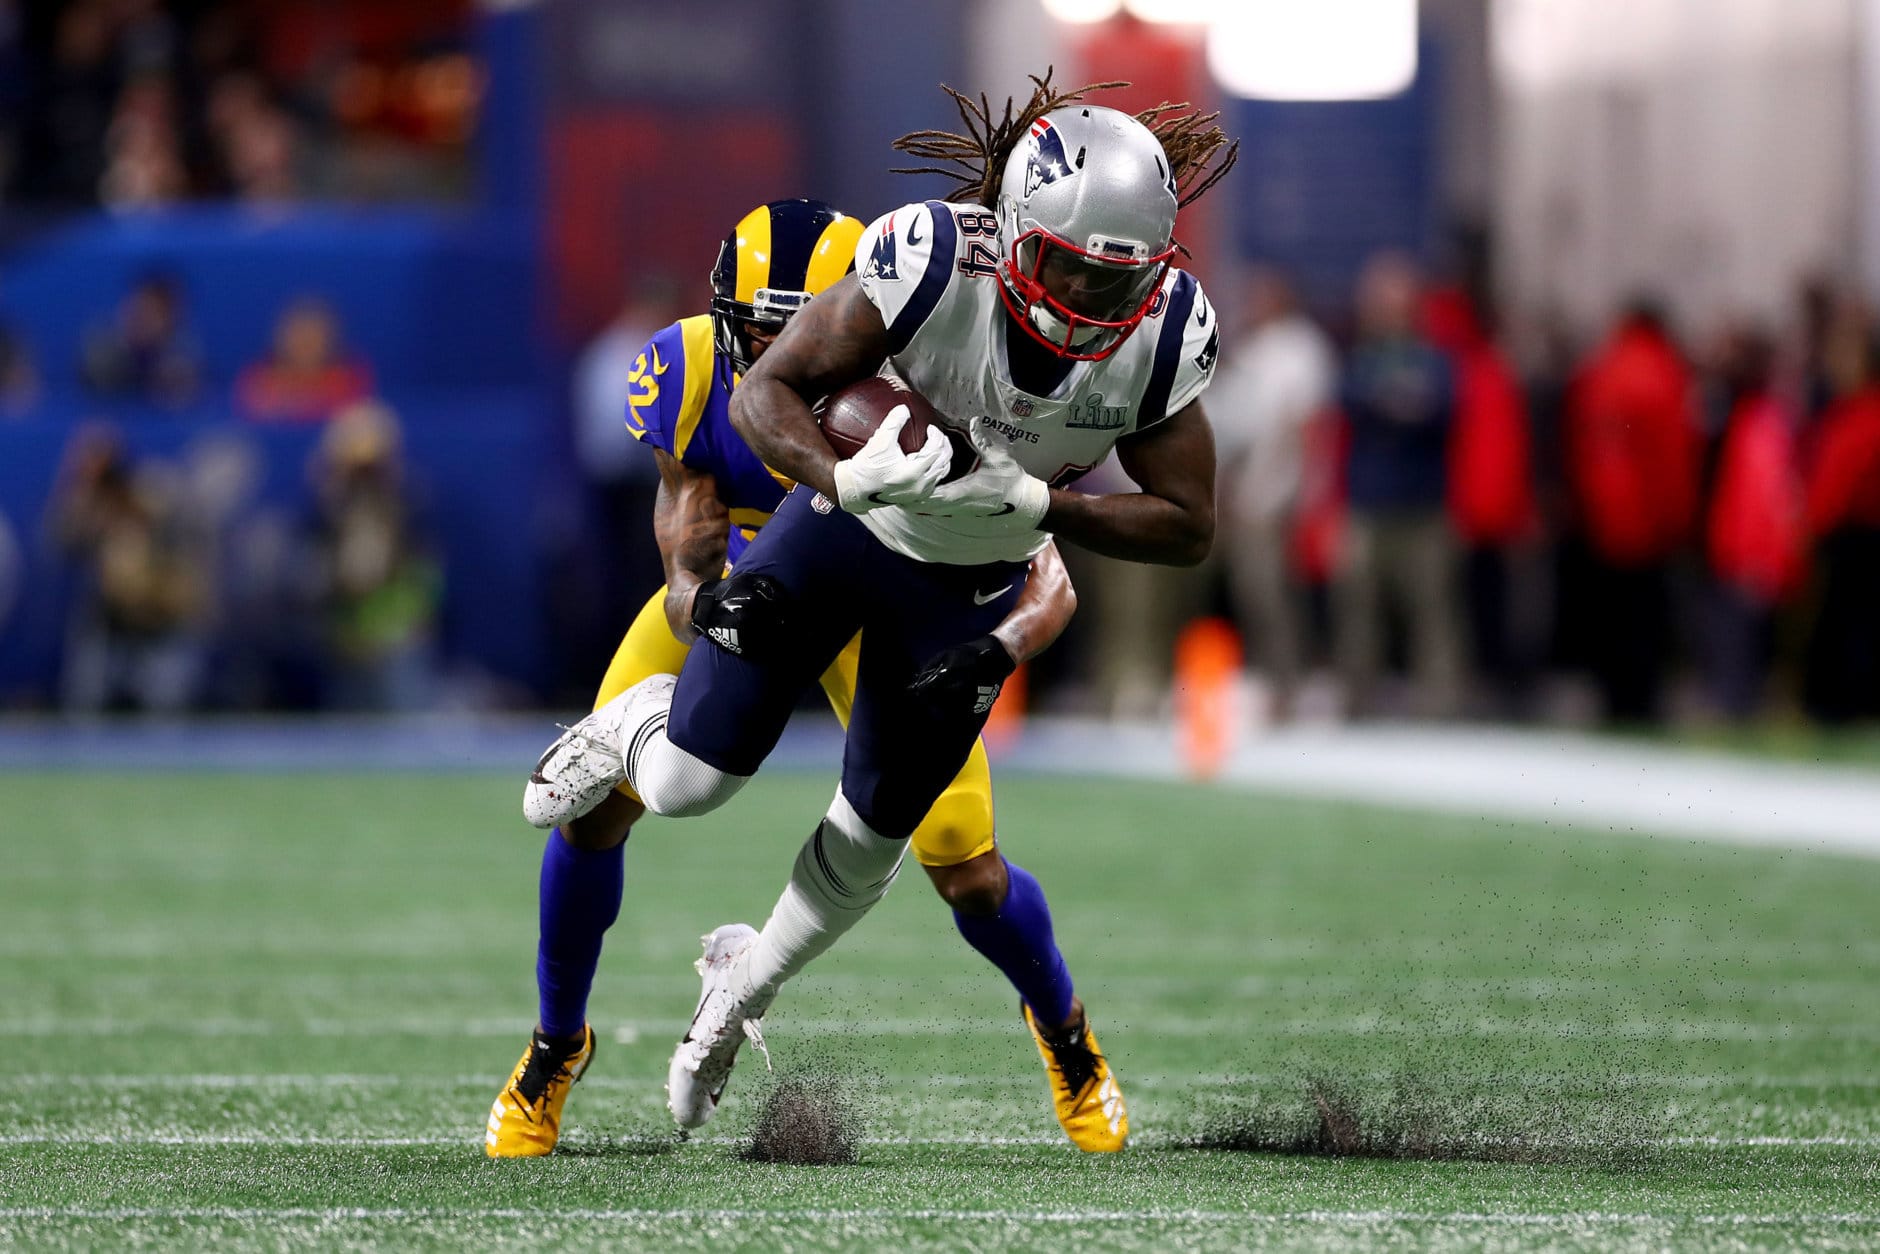 ATLANTA, GEORGIA - FEBRUARY 03:  Cordarrelle Patterson #84 of the New England Patriots is tackled by Marcus Peters #22 of the Los Angeles Rams in the second quarter during Super Bowl LIII at Mercedes-Benz Stadium on February 03, 2019 in Atlanta, Georgia. (Photo by Maddie Meyer/Getty Images)